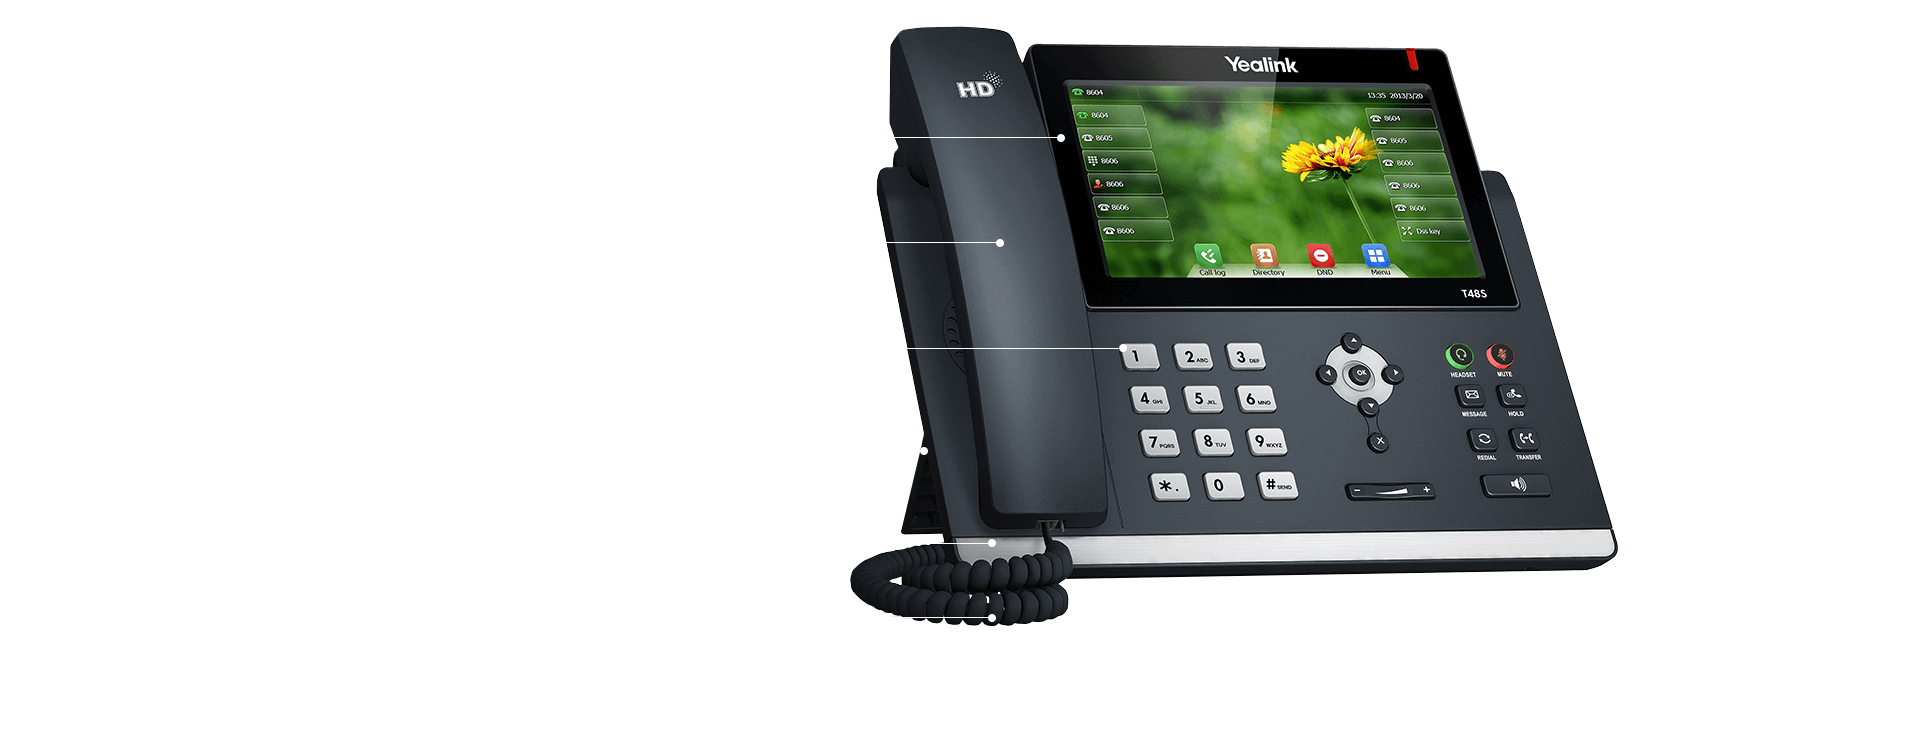 The cutting-edge design of the Yealink T4S series includes telephony superi...